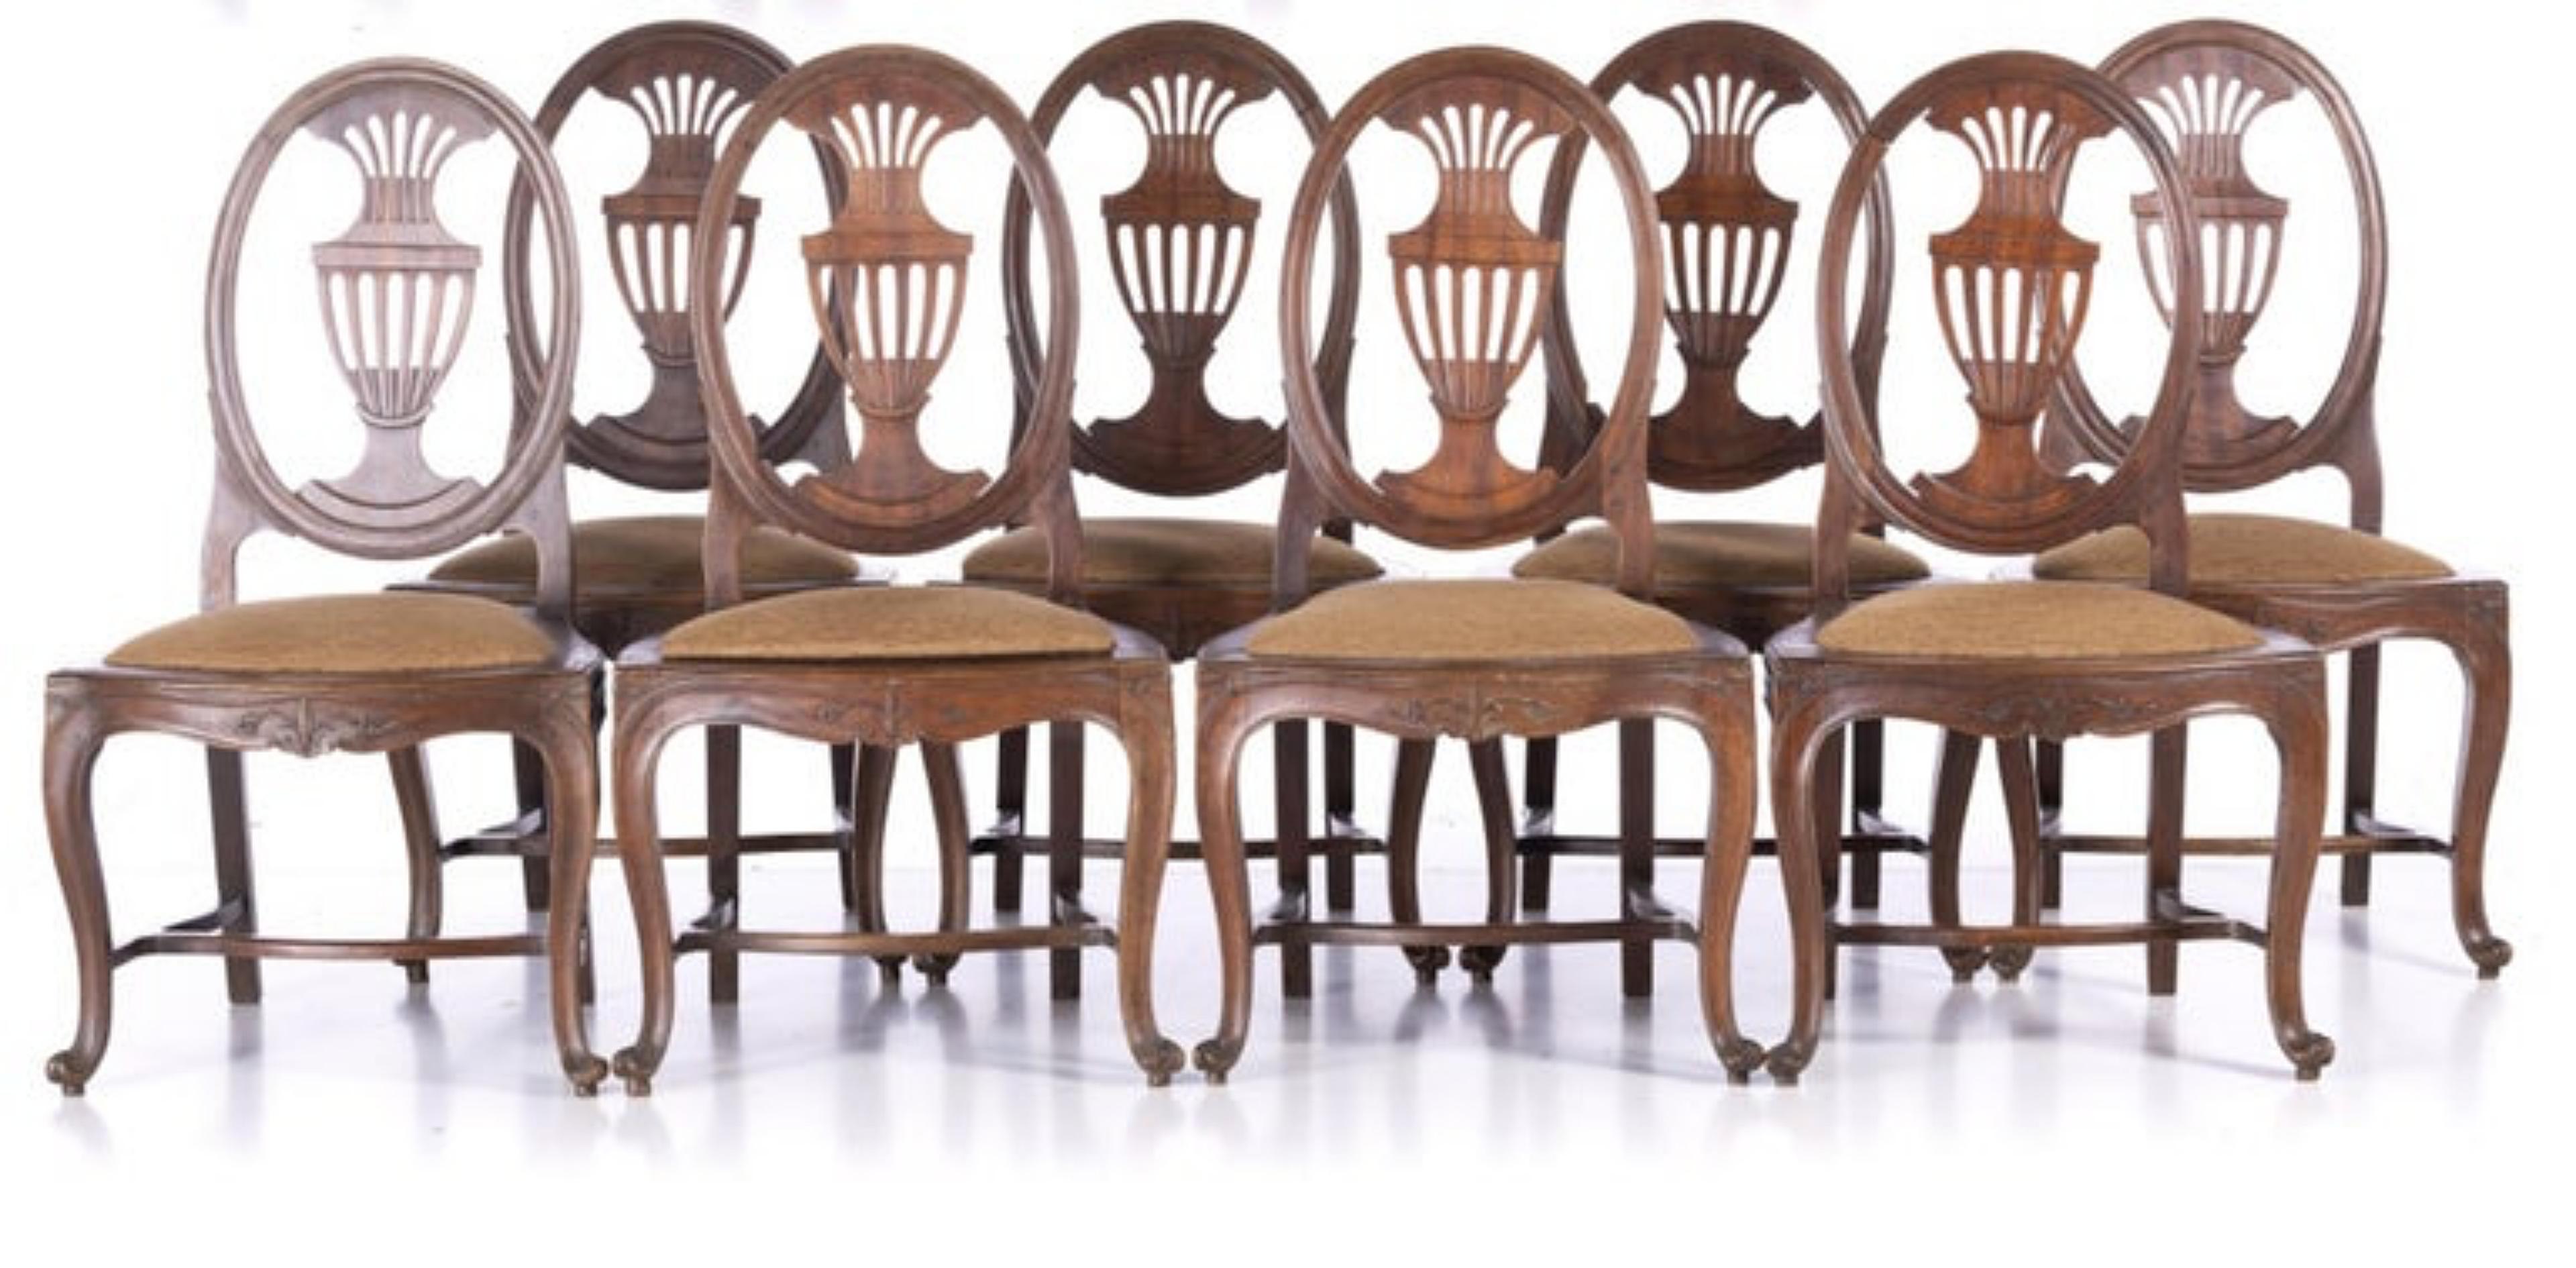 Renaissance Eight Portuguese Chairs and Canape, 18th Century in Oilwood For Sale